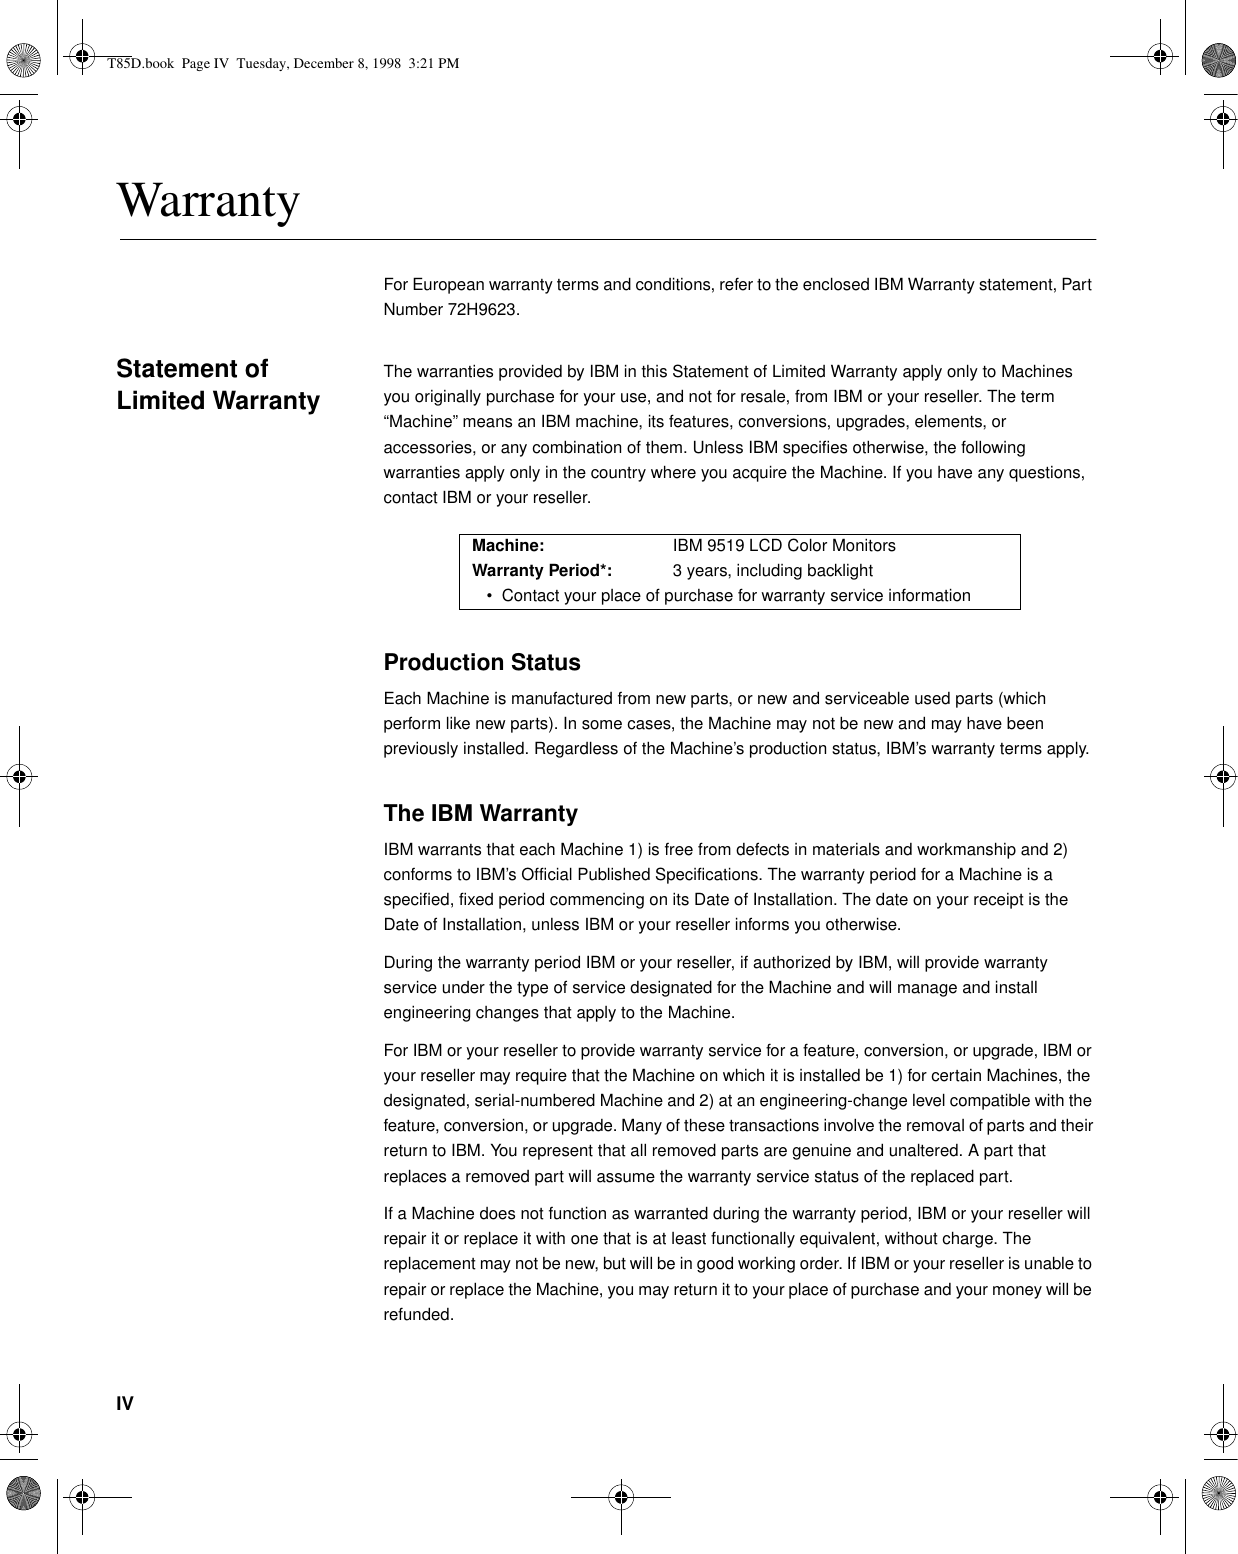 IVWarrantyFor European warranty terms and conditions, refer to the enclosed IBM Warranty statement, Part Number 72H9623.Statement of Limited WarrantyThe warranties provided by IBM in this Statement of Limited Warranty apply only to Machines you originally purchase for your use, and not for resale, from IBM or your reseller. The term “Machine” means an IBM machine, its features, conversions, upgrades, elements, or accessories, or any combination of them. Unless IBM specifies otherwise, the following warranties apply only in the country where you acquire the Machine. If you have any questions, contact IBM or your reseller.Production StatusEach Machine is manufactured from new parts, or new and serviceable used parts (which perform like new parts). In some cases, the Machine may not be new and may have been previously installed. Regardless of the Machine’s production status, IBM’s warranty terms apply.The IBM WarrantyIBM warrants that each Machine 1) is free from defects in materials and workmanship and 2) conforms to IBM’s Official Published Specifications. The warranty period for a Machine is a specified, fixed period commencing on its Date of Installation. The date on your receipt is the Date of Installation, unless IBM or your reseller informs you otherwise.During the warranty period IBM or your reseller, if authorized by IBM, will provide warranty service under the type of service designated for the Machine and will manage and install engineering changes that apply to the Machine.For IBM or your reseller to provide warranty service for a feature, conversion, or upgrade, IBM or your reseller may require that the Machine on which it is installed be 1) for certain Machines, the designated, serial-numbered Machine and 2) at an engineering-change level compatible with the feature, conversion, or upgrade. Many of these transactions involve the removal of parts and their return to IBM. You represent that all removed parts are genuine and unaltered. A part that replaces a removed part will assume the warranty service status of the replaced part.If a Machine does not function as warranted during the warranty period, IBM or your reseller will repair it or replace it with one that is at least functionally equivalent, without charge. The replacement may not be new, but will be in good working order. If IBM or your reseller is unable to repair or replace the Machine, you may return it to your place of purchase and your money will be refunded.Machine: IBM 9519 LCD Color MonitorsWarranty Period*: 3 years, including backlight• Contact your place of purchase for warranty service informationT85D.book  Page IV  Tuesday, December 8, 1998  3:21 PM